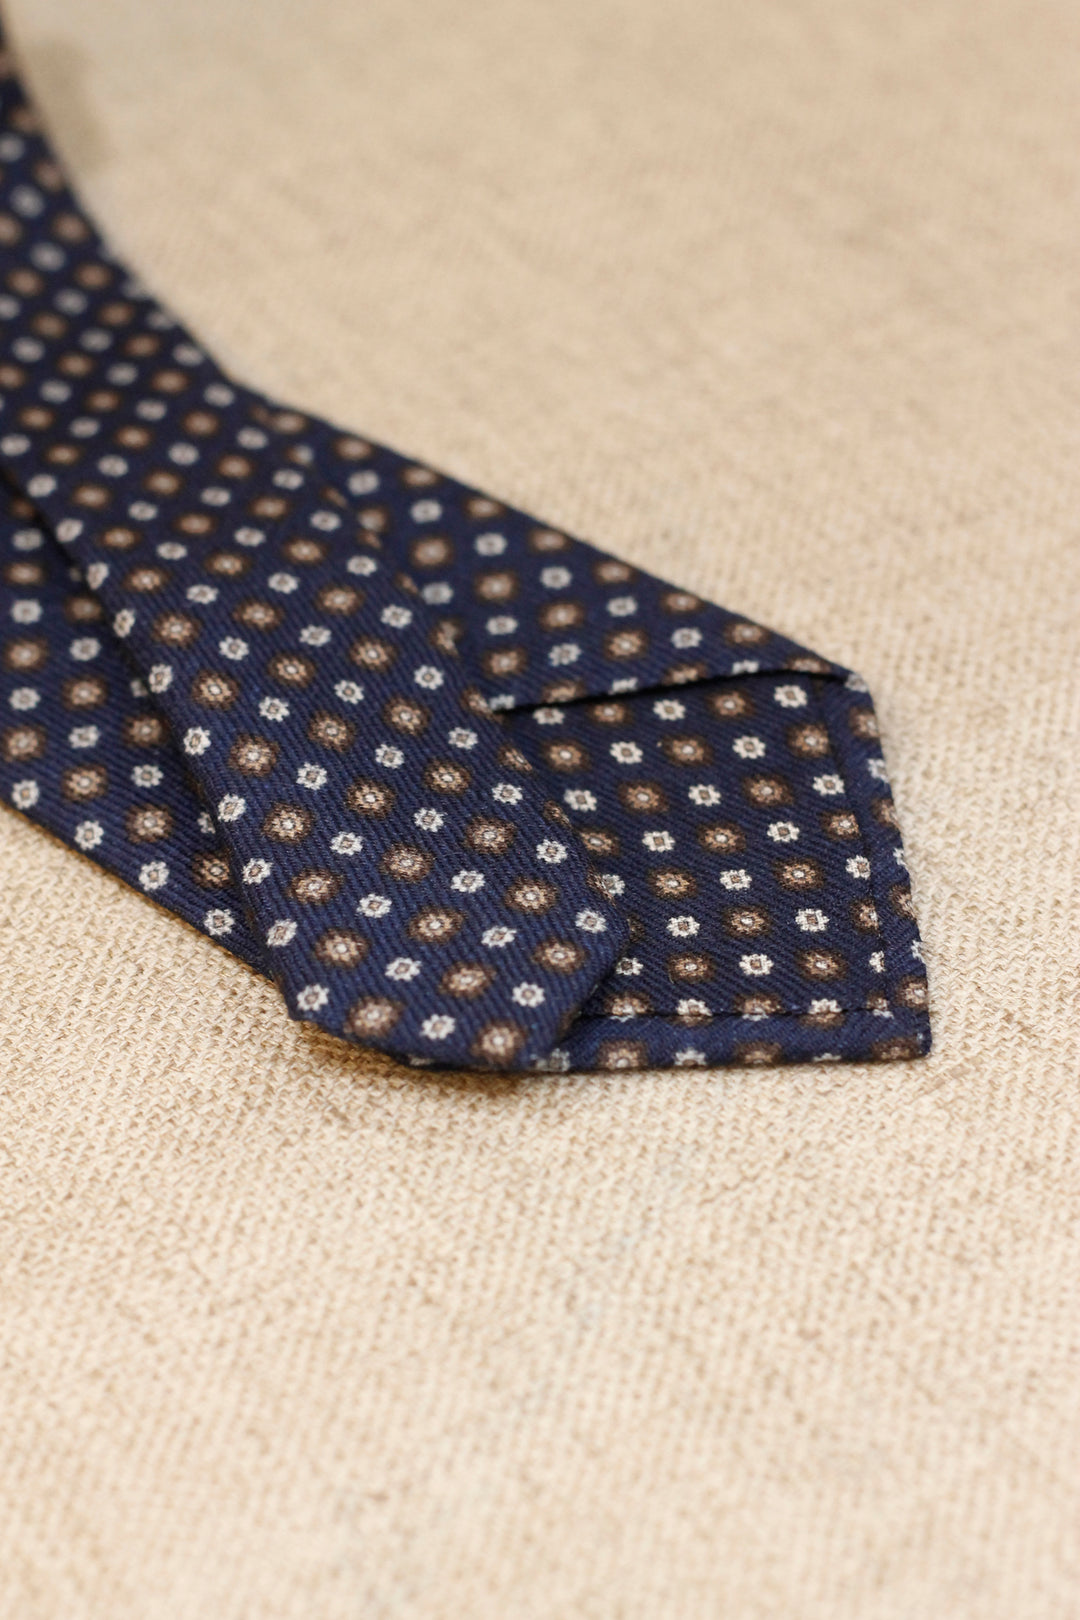 Napoli WOOL Navy Blue Tie with White and Brown Daisies